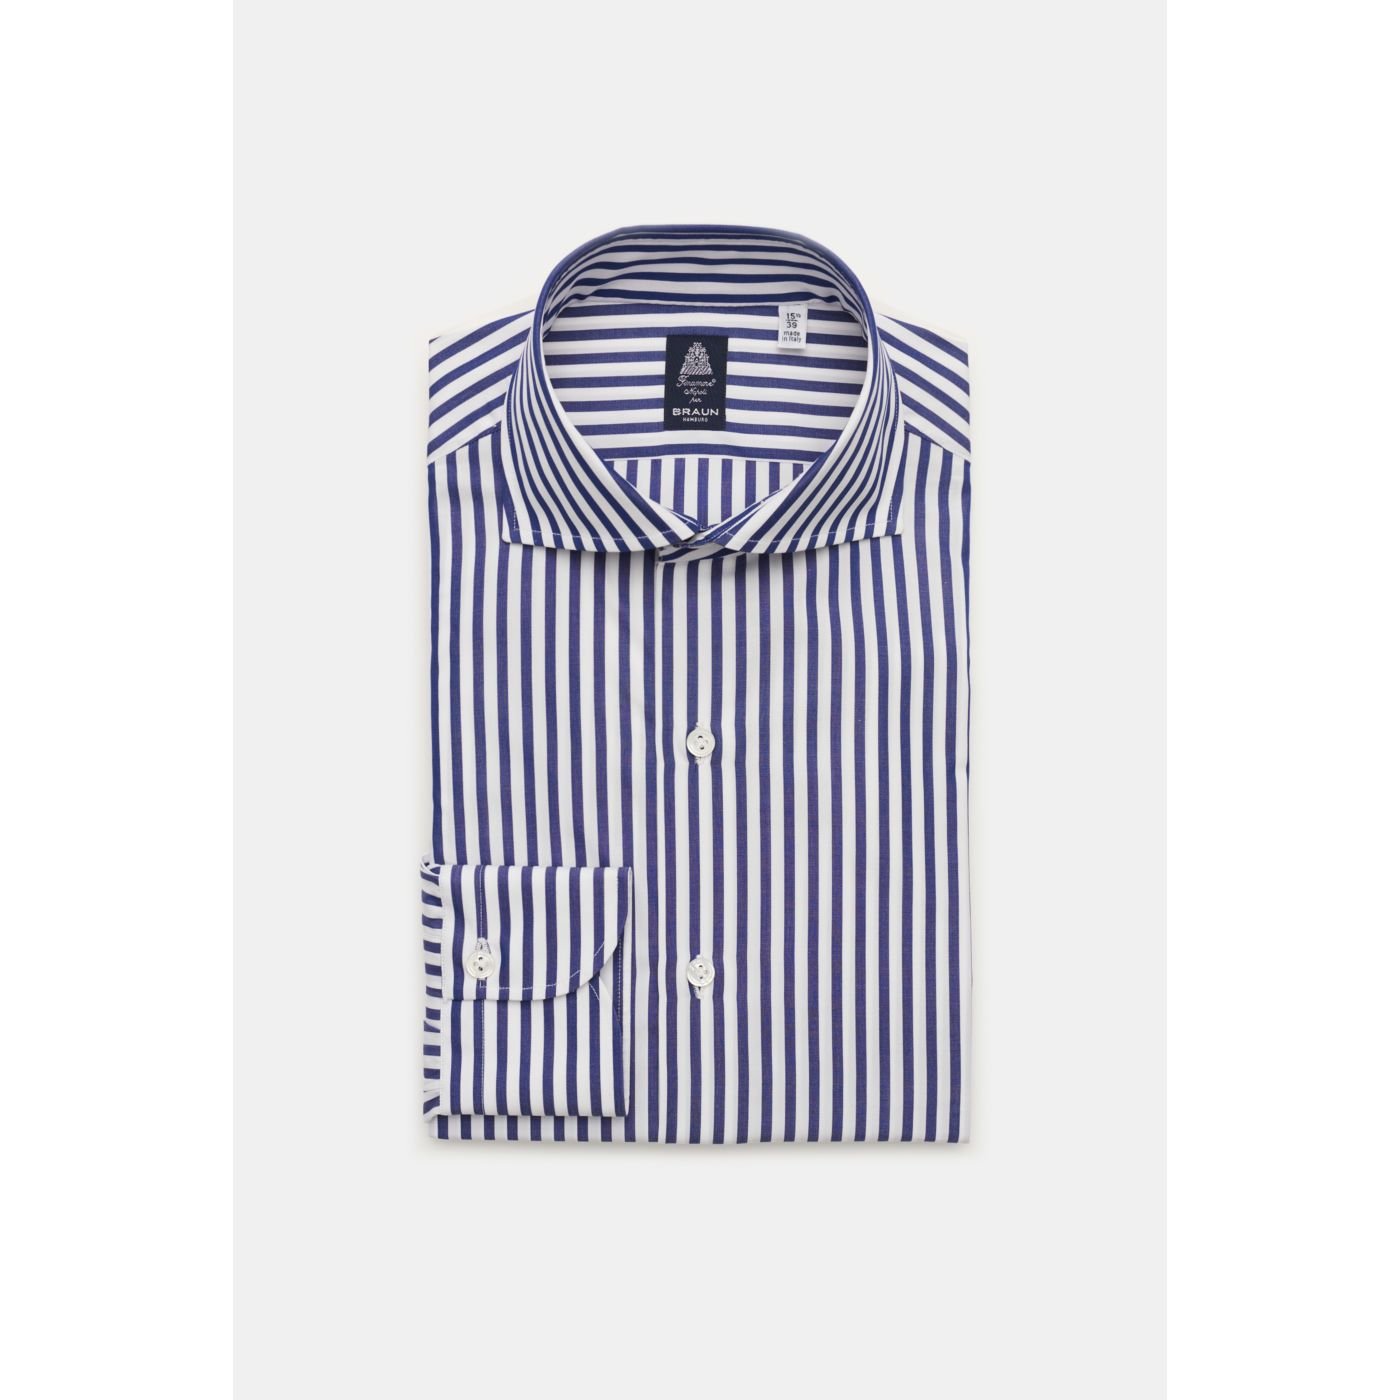 Fashion Details about Finamore 1925 Shirt IN Blue Striped With ...